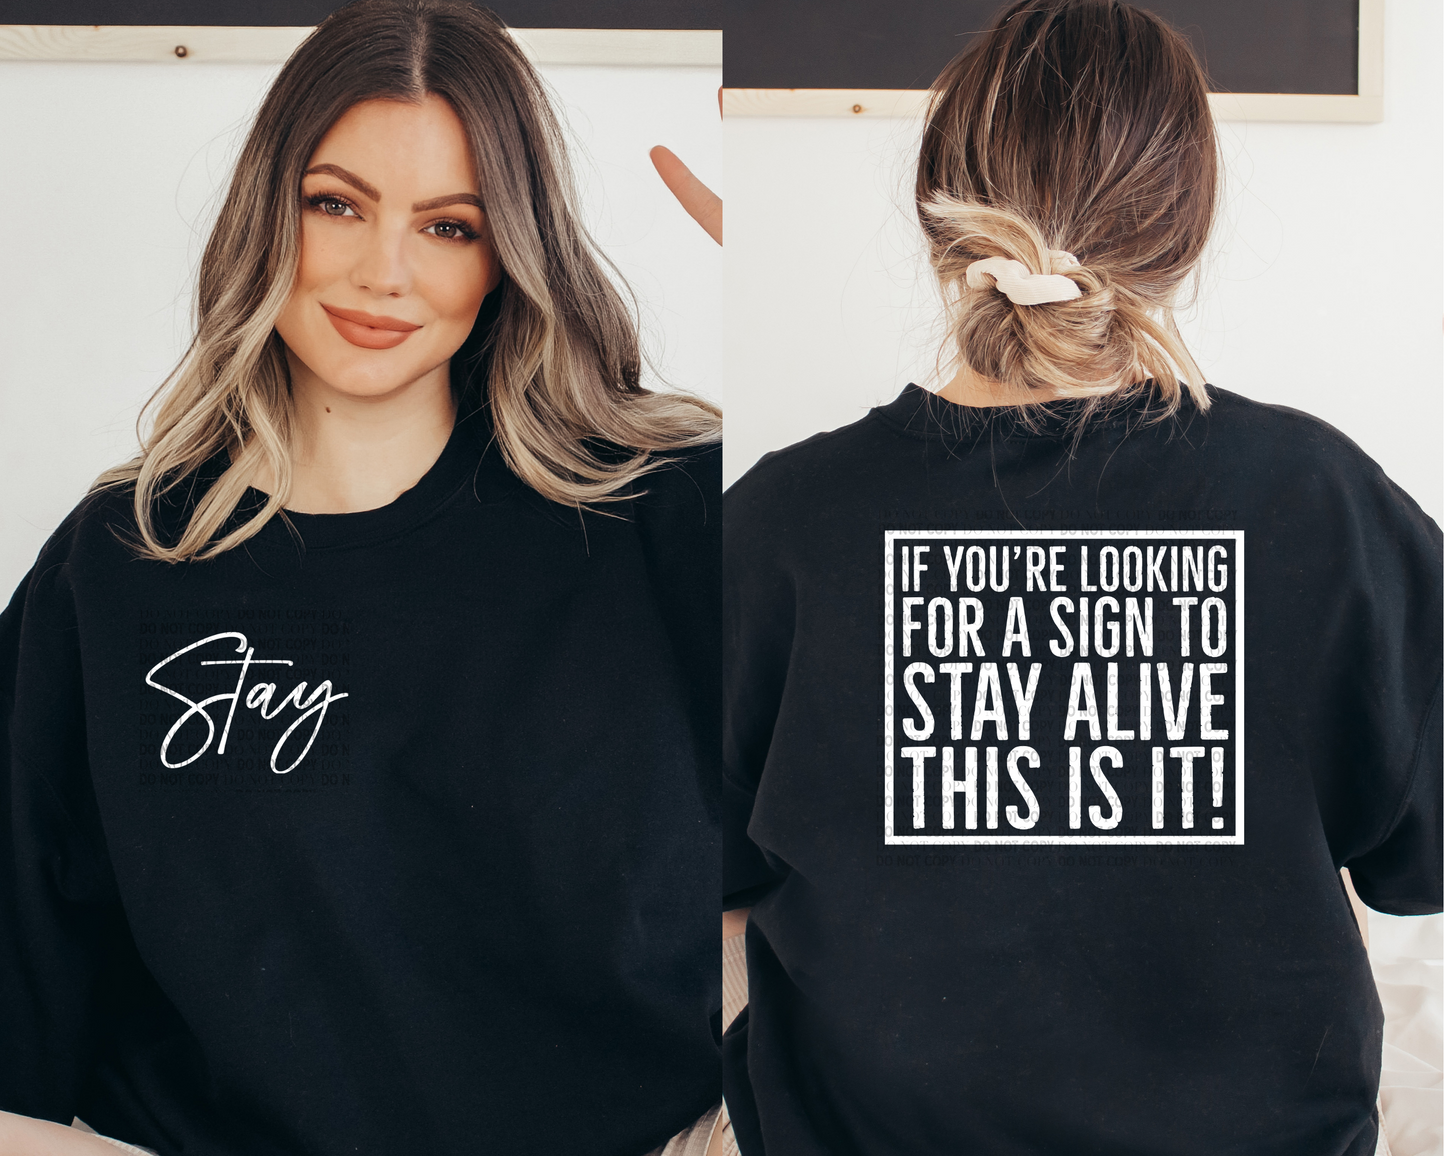 If You're Looking For A Sign To Stay Alive - THIS IS IT! + Stay Pocket ~ Tee